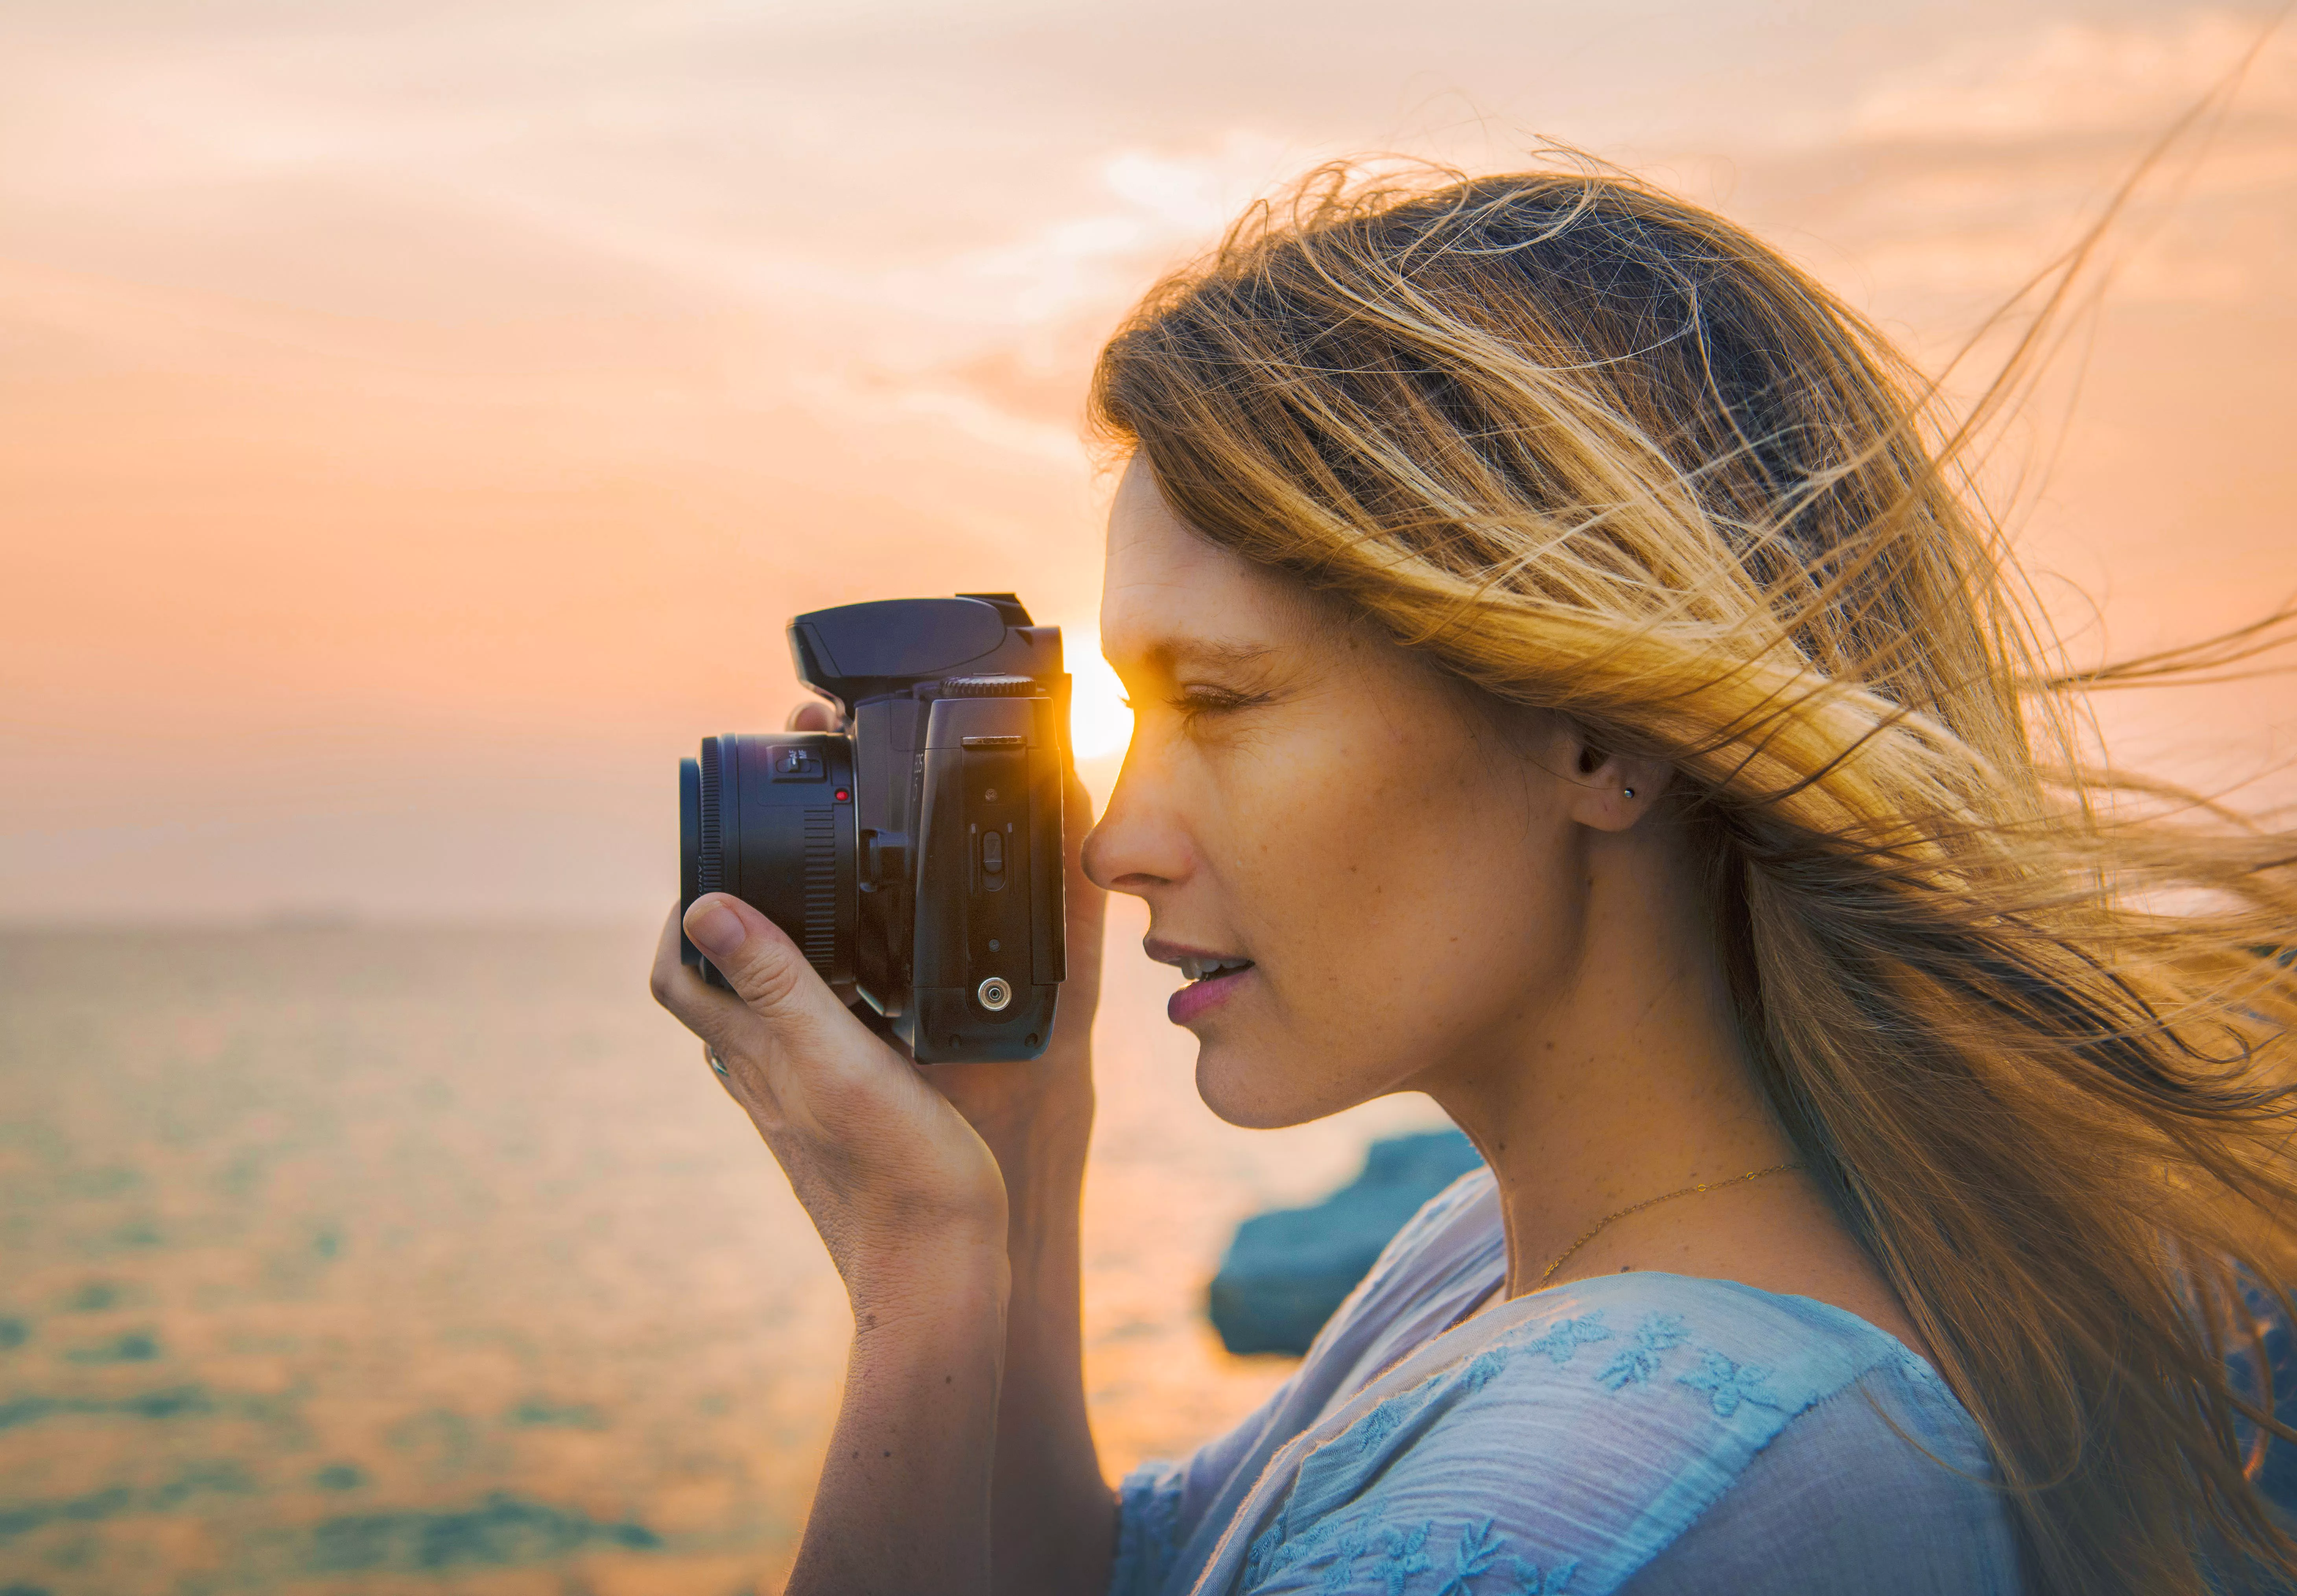 The Complete Online Photography Course for Beginners